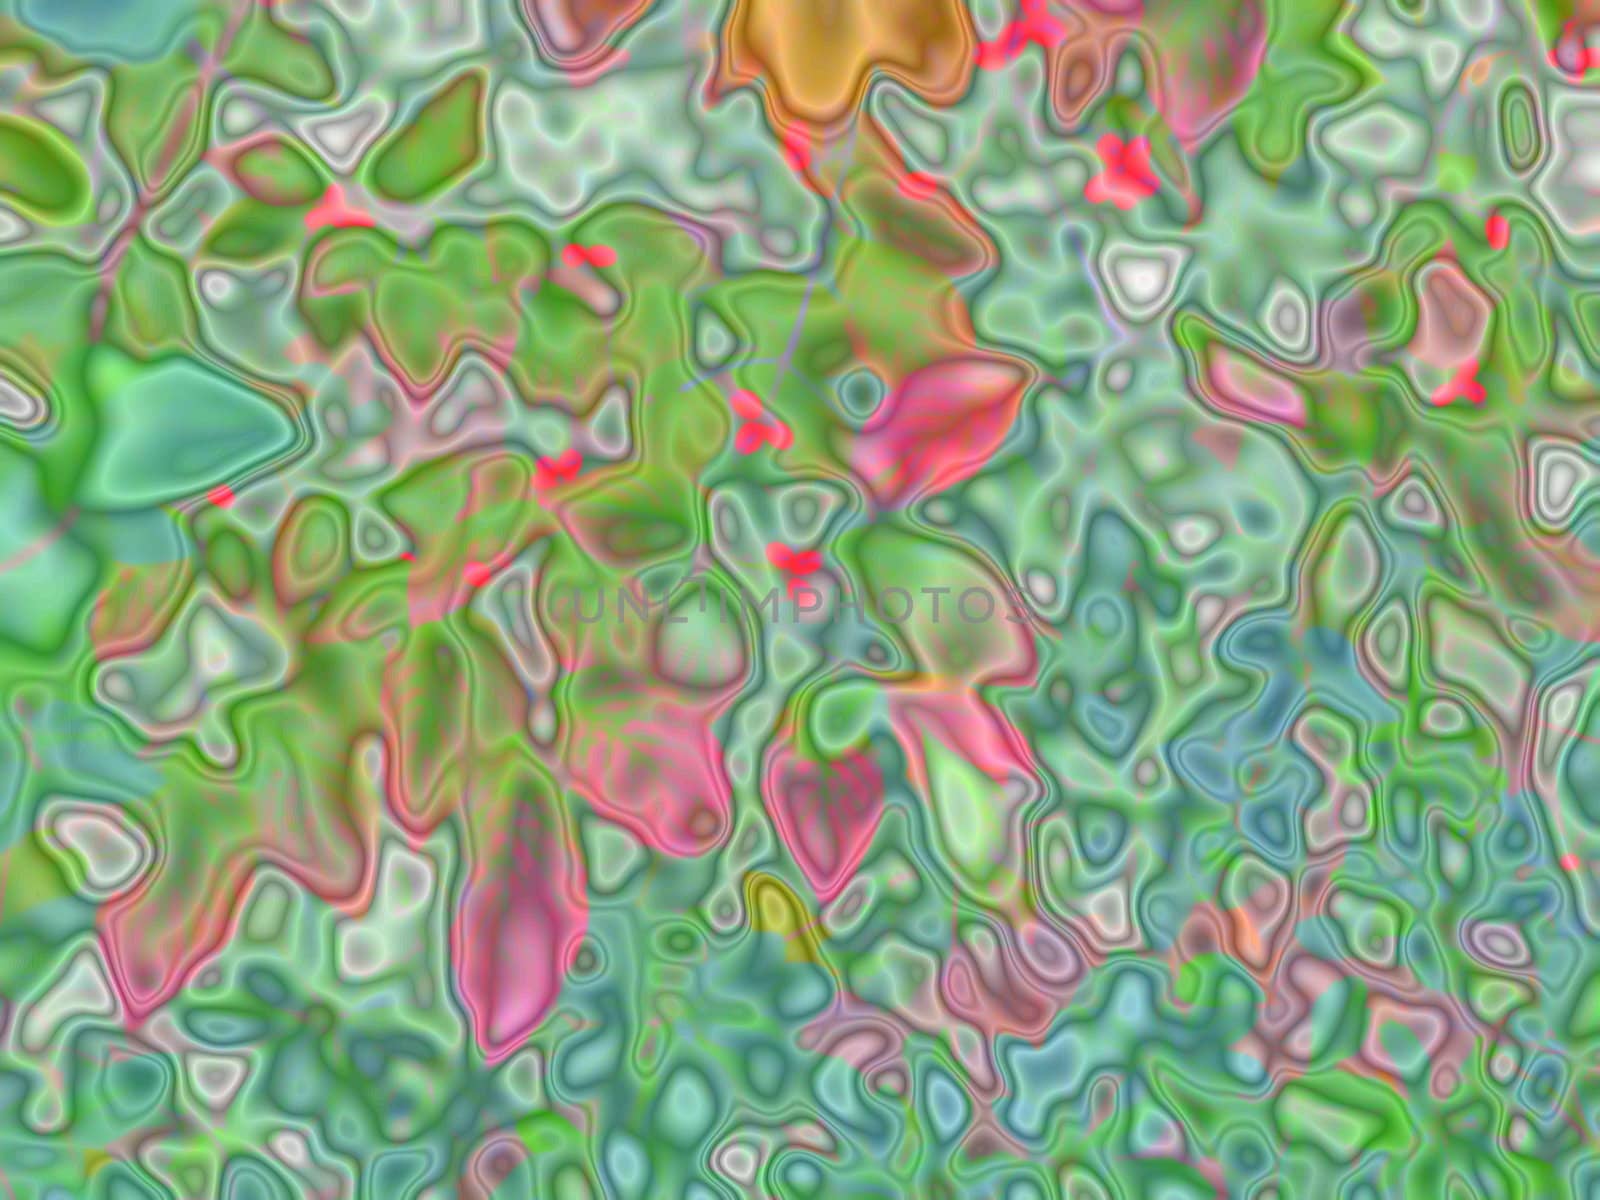 berries and foliage in abstract art effect